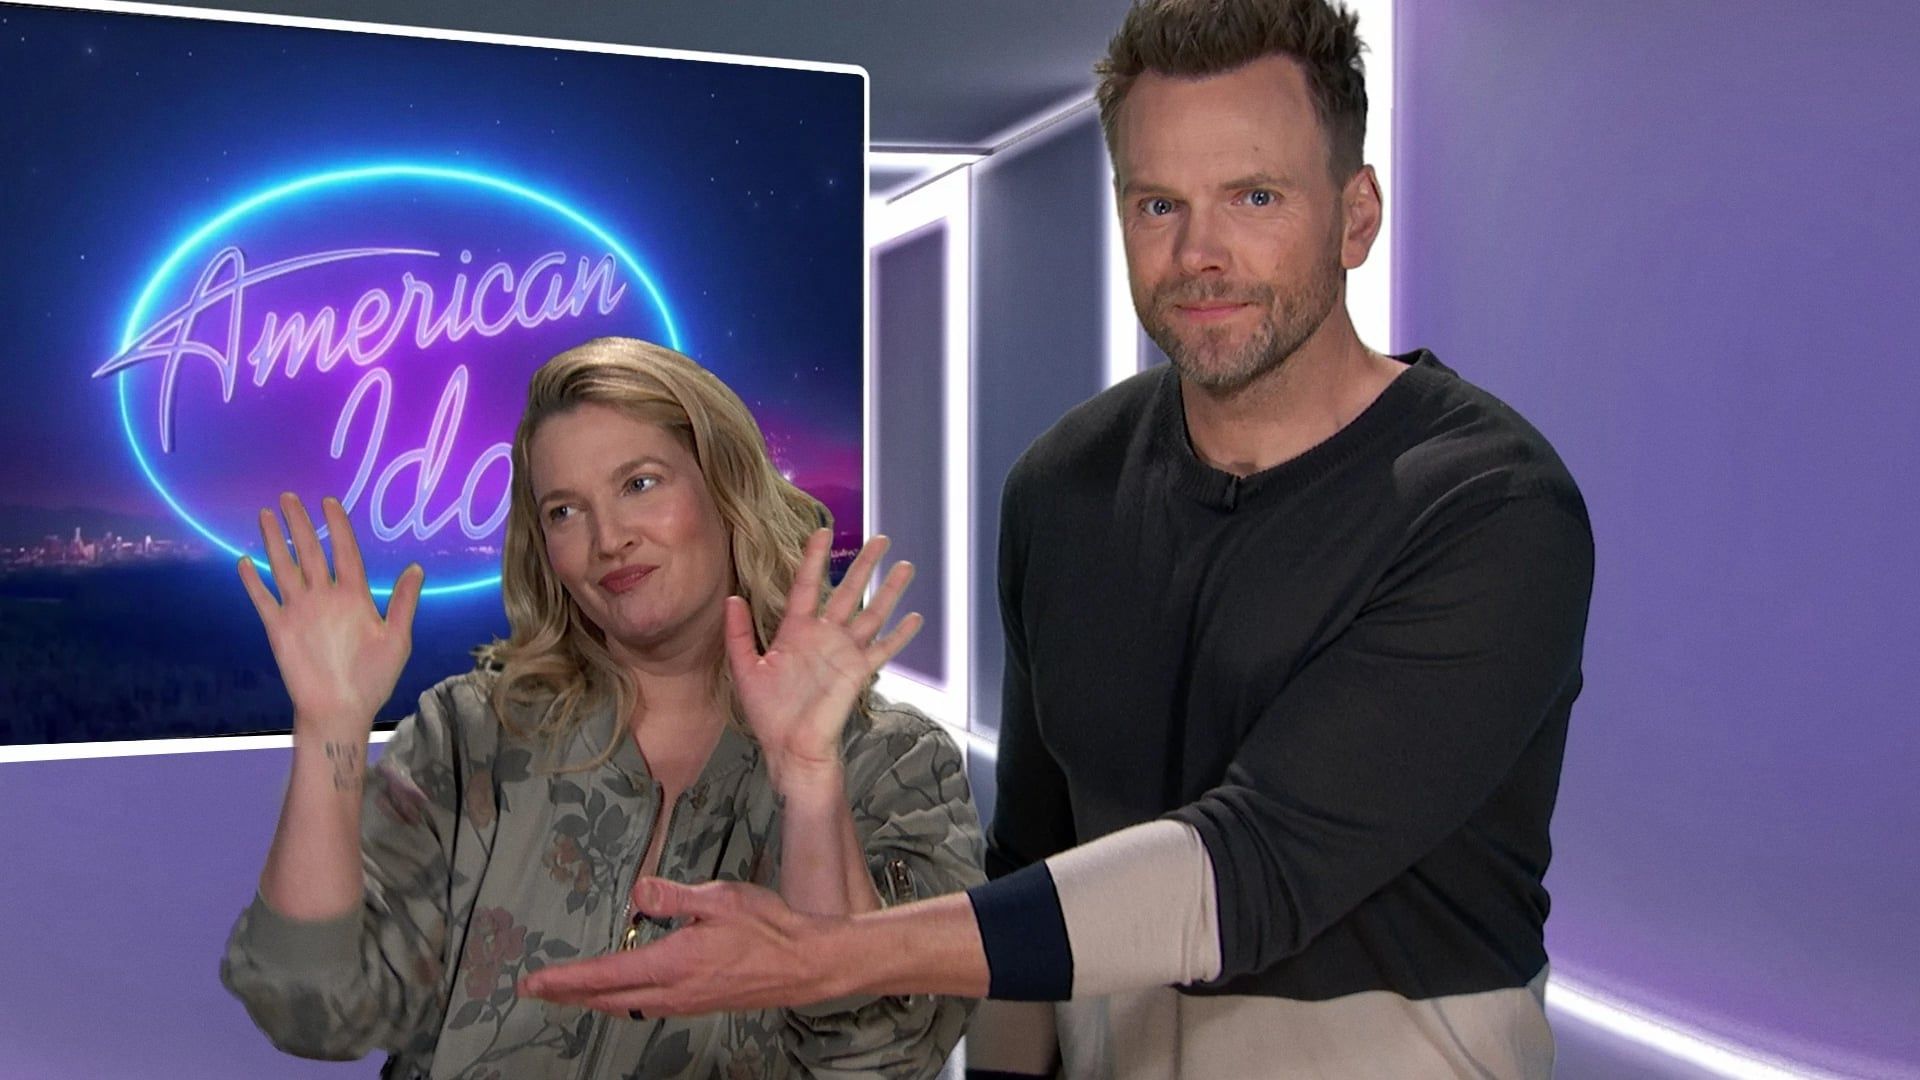 The Joel McHale Show with Joel McHale background